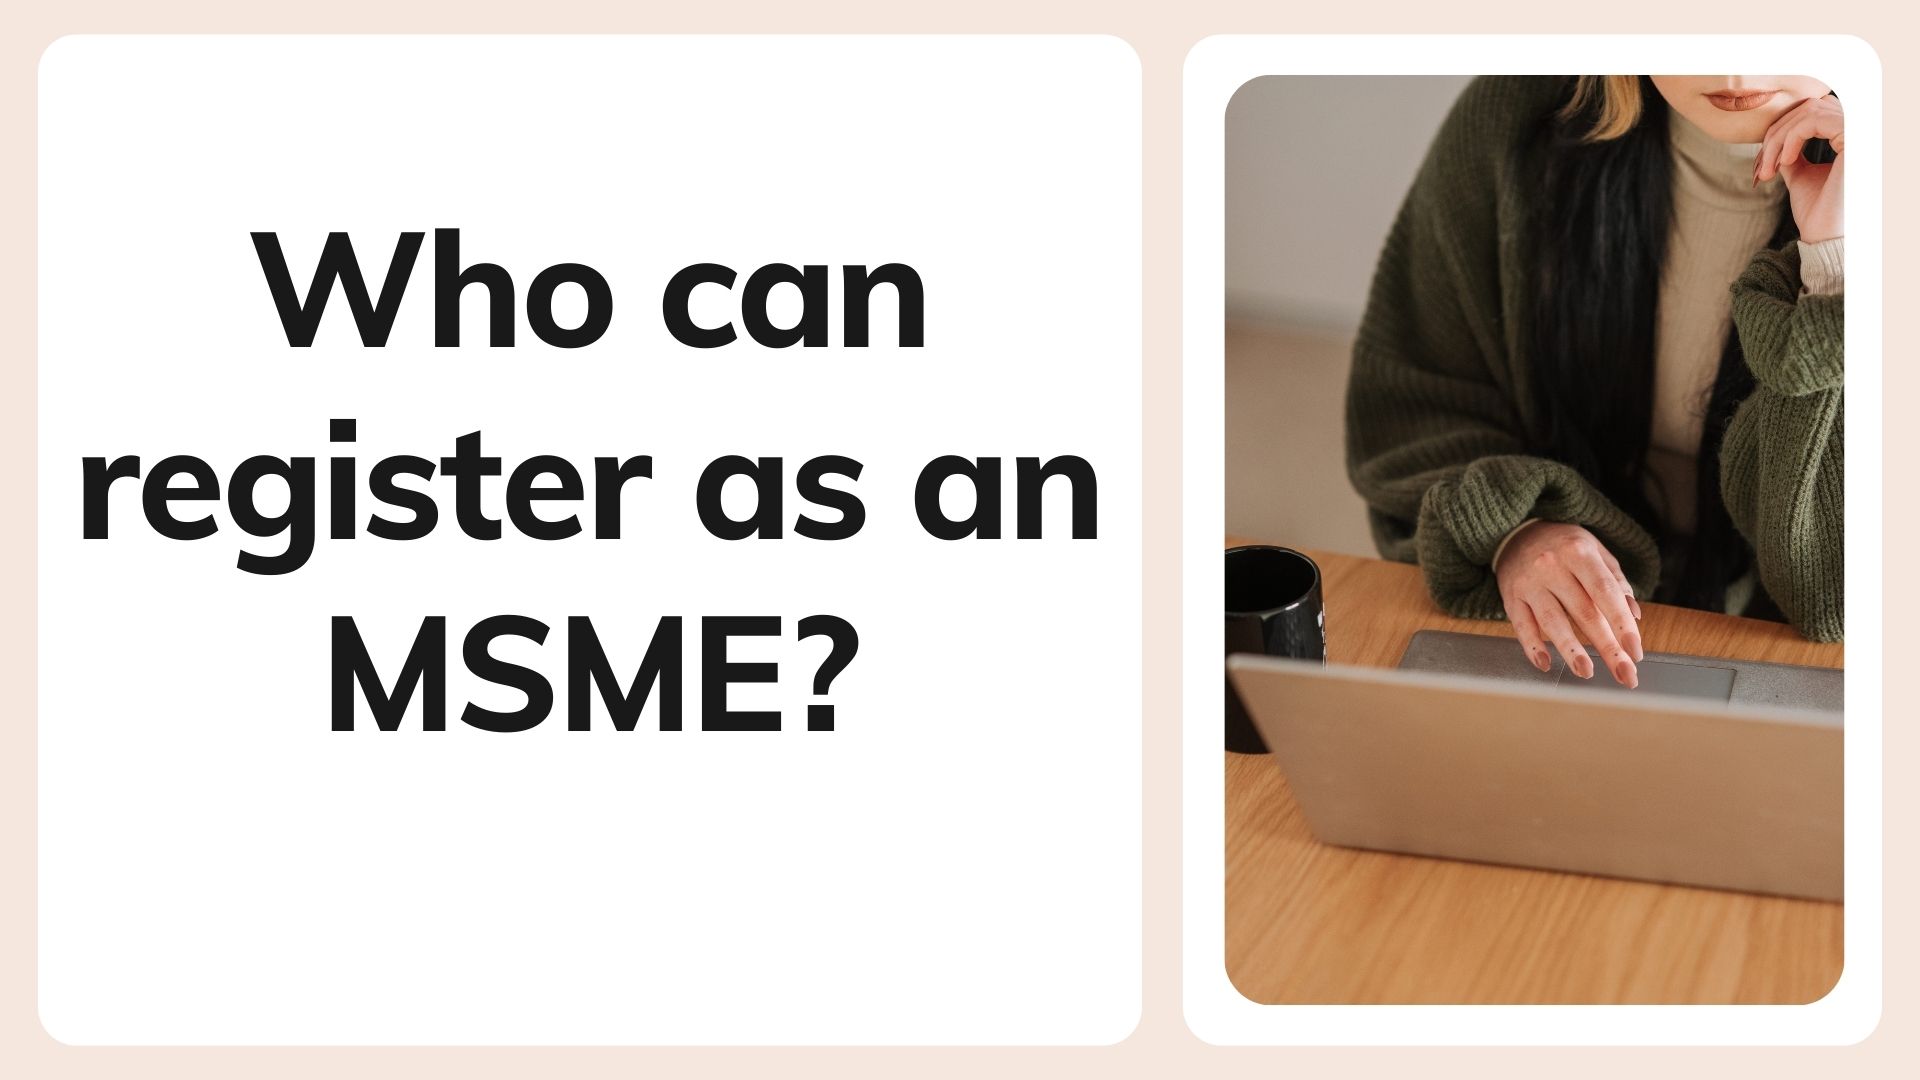 Who can register as an MSME